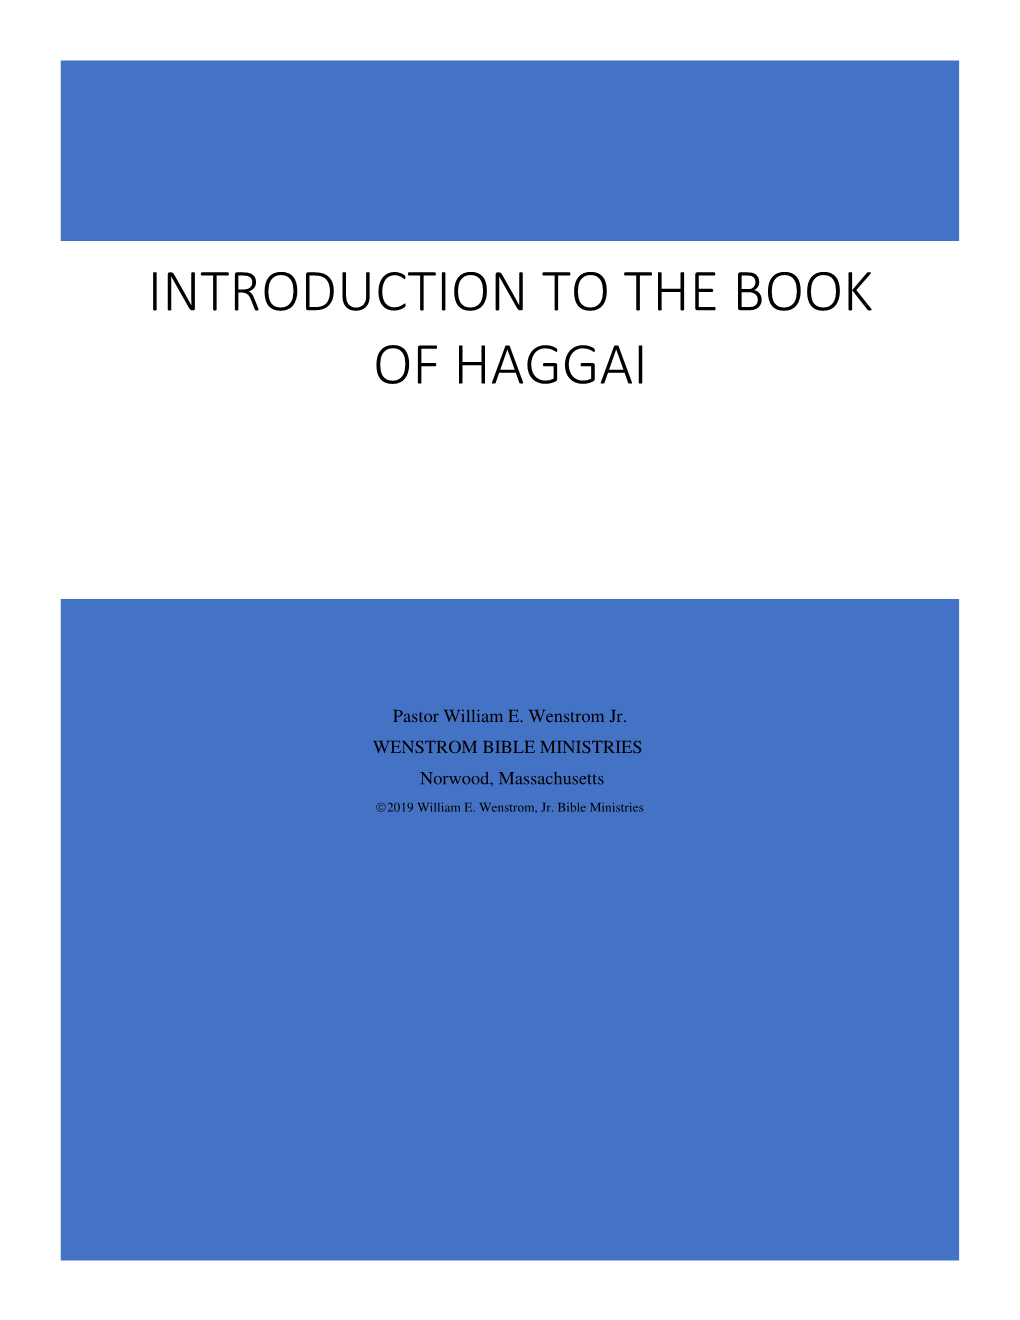 Introduction to the Book of Haggai